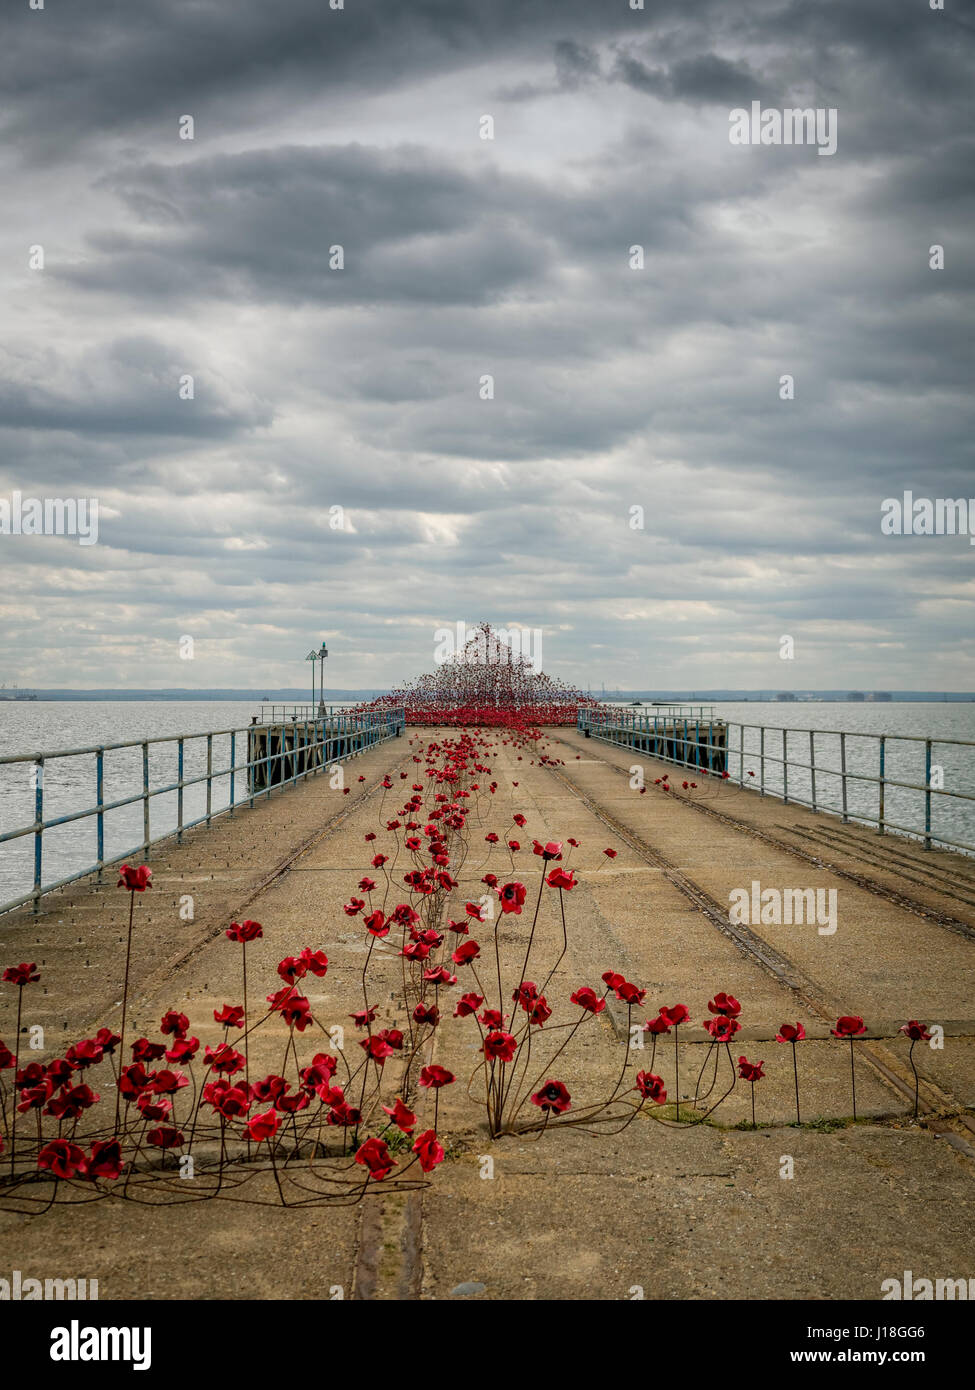 Poppies Wave is an art installation by artist Paul Cummins on display at Barge Pier in Gunners Park, Shoeburyness, Essex as part of a tour of the UK. Stock Photo